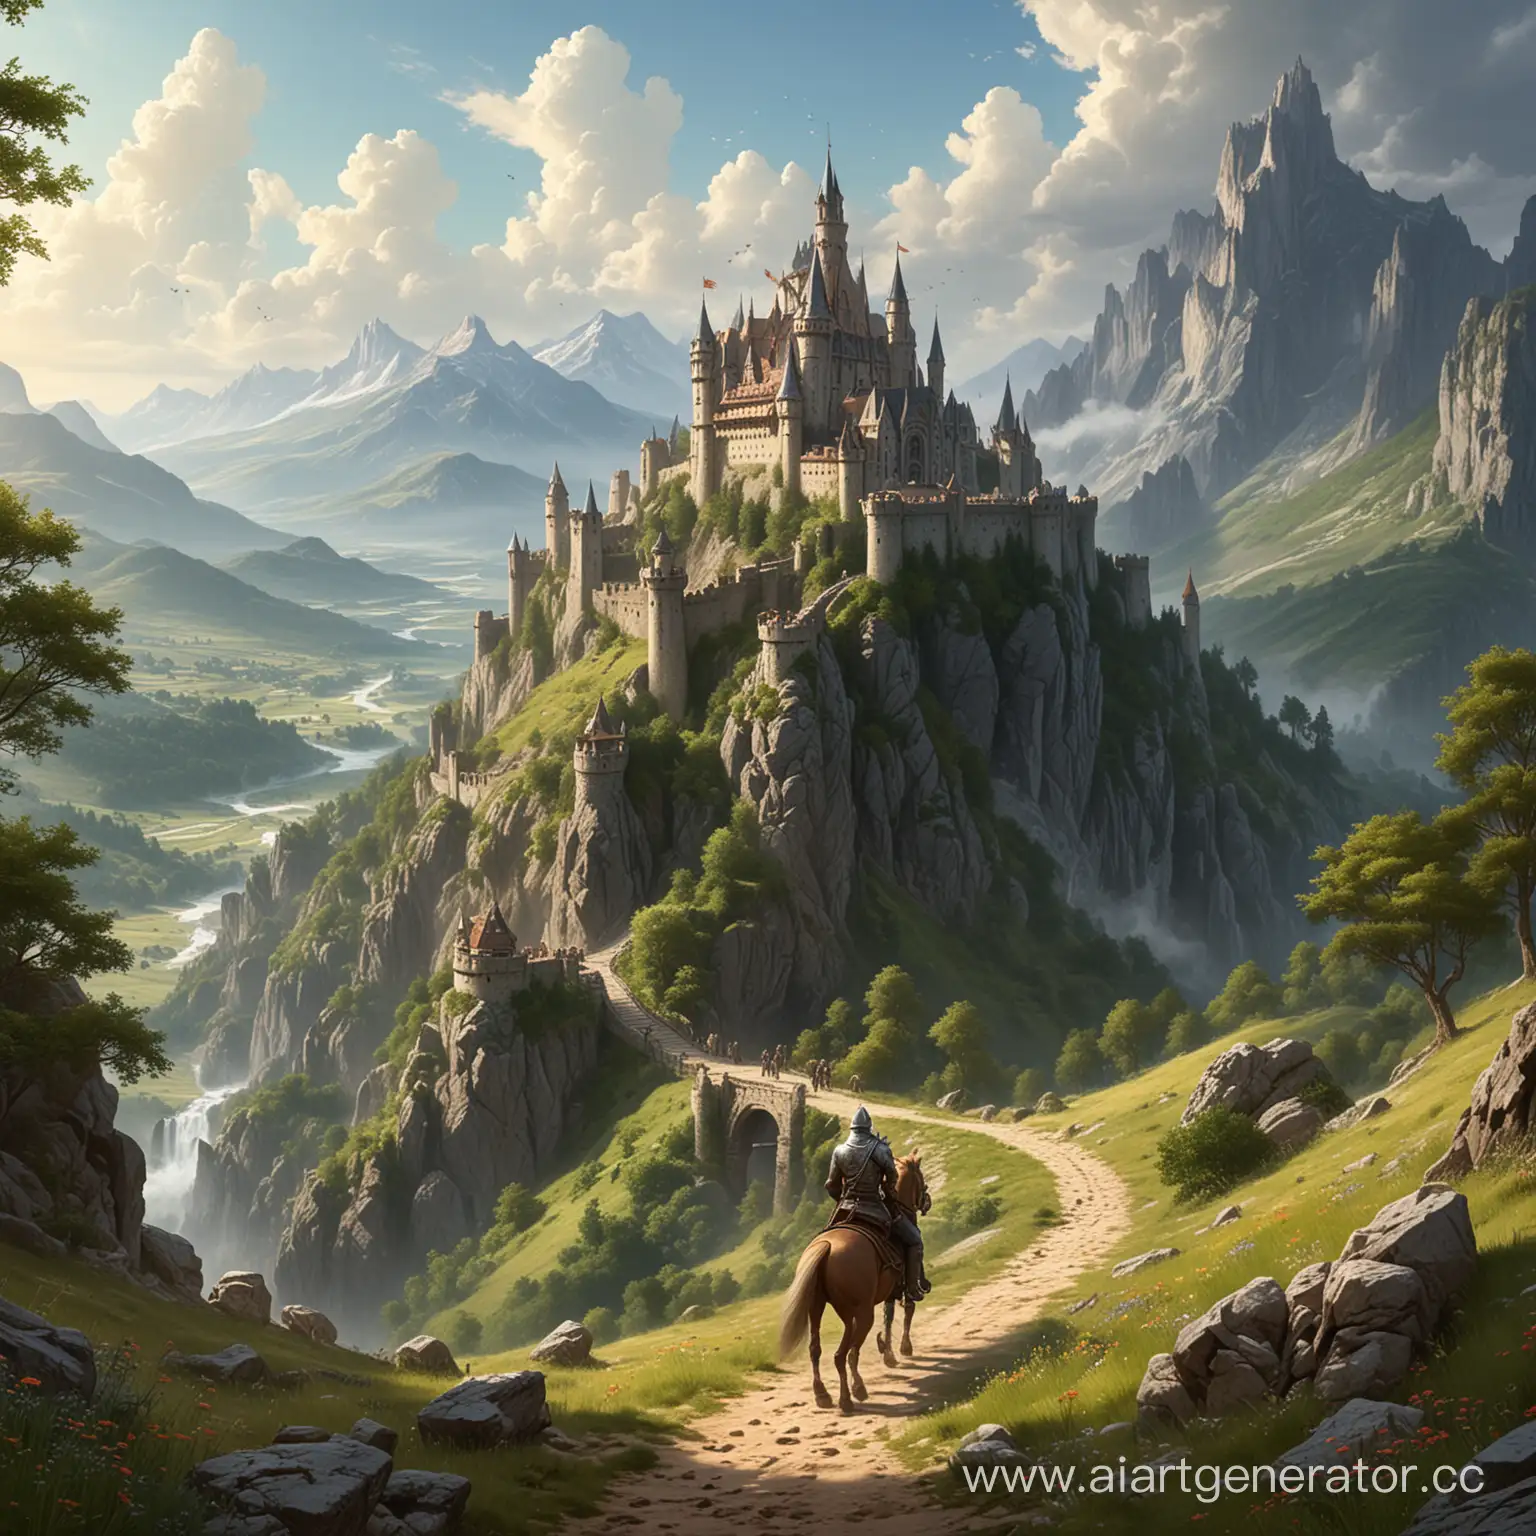 Knight-Riding-to-Castle-Encounters-Elves-and-Orcs-in-Mountainous-Summer-Terrain